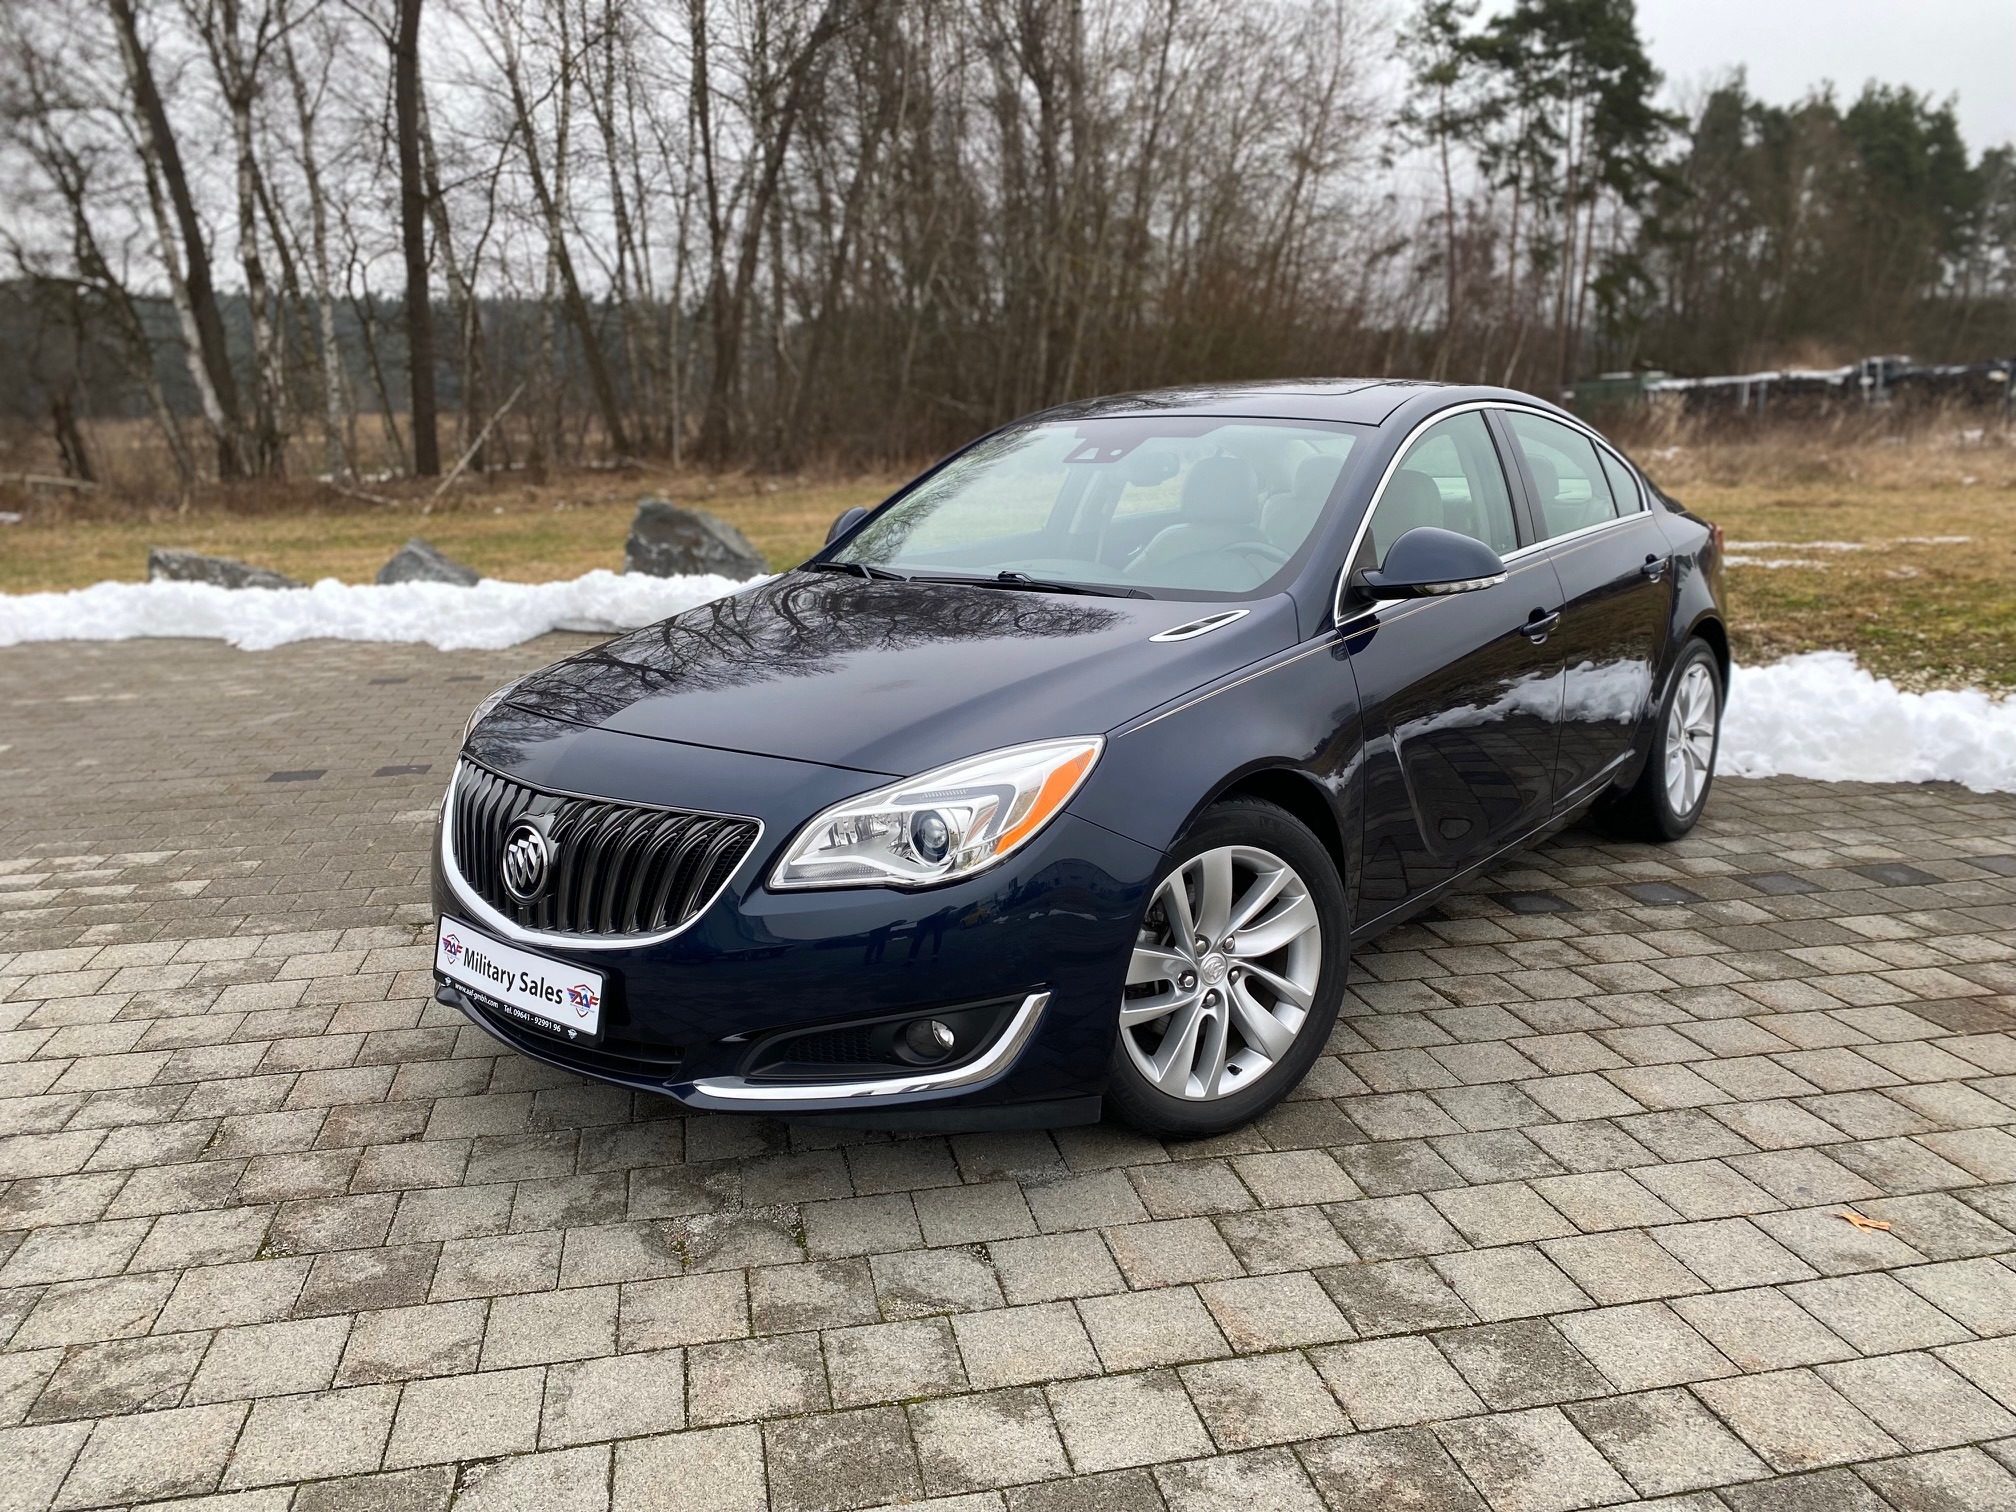 2016 Buick Regal</br>2WD</br>as low as </br>$169 per paycheck